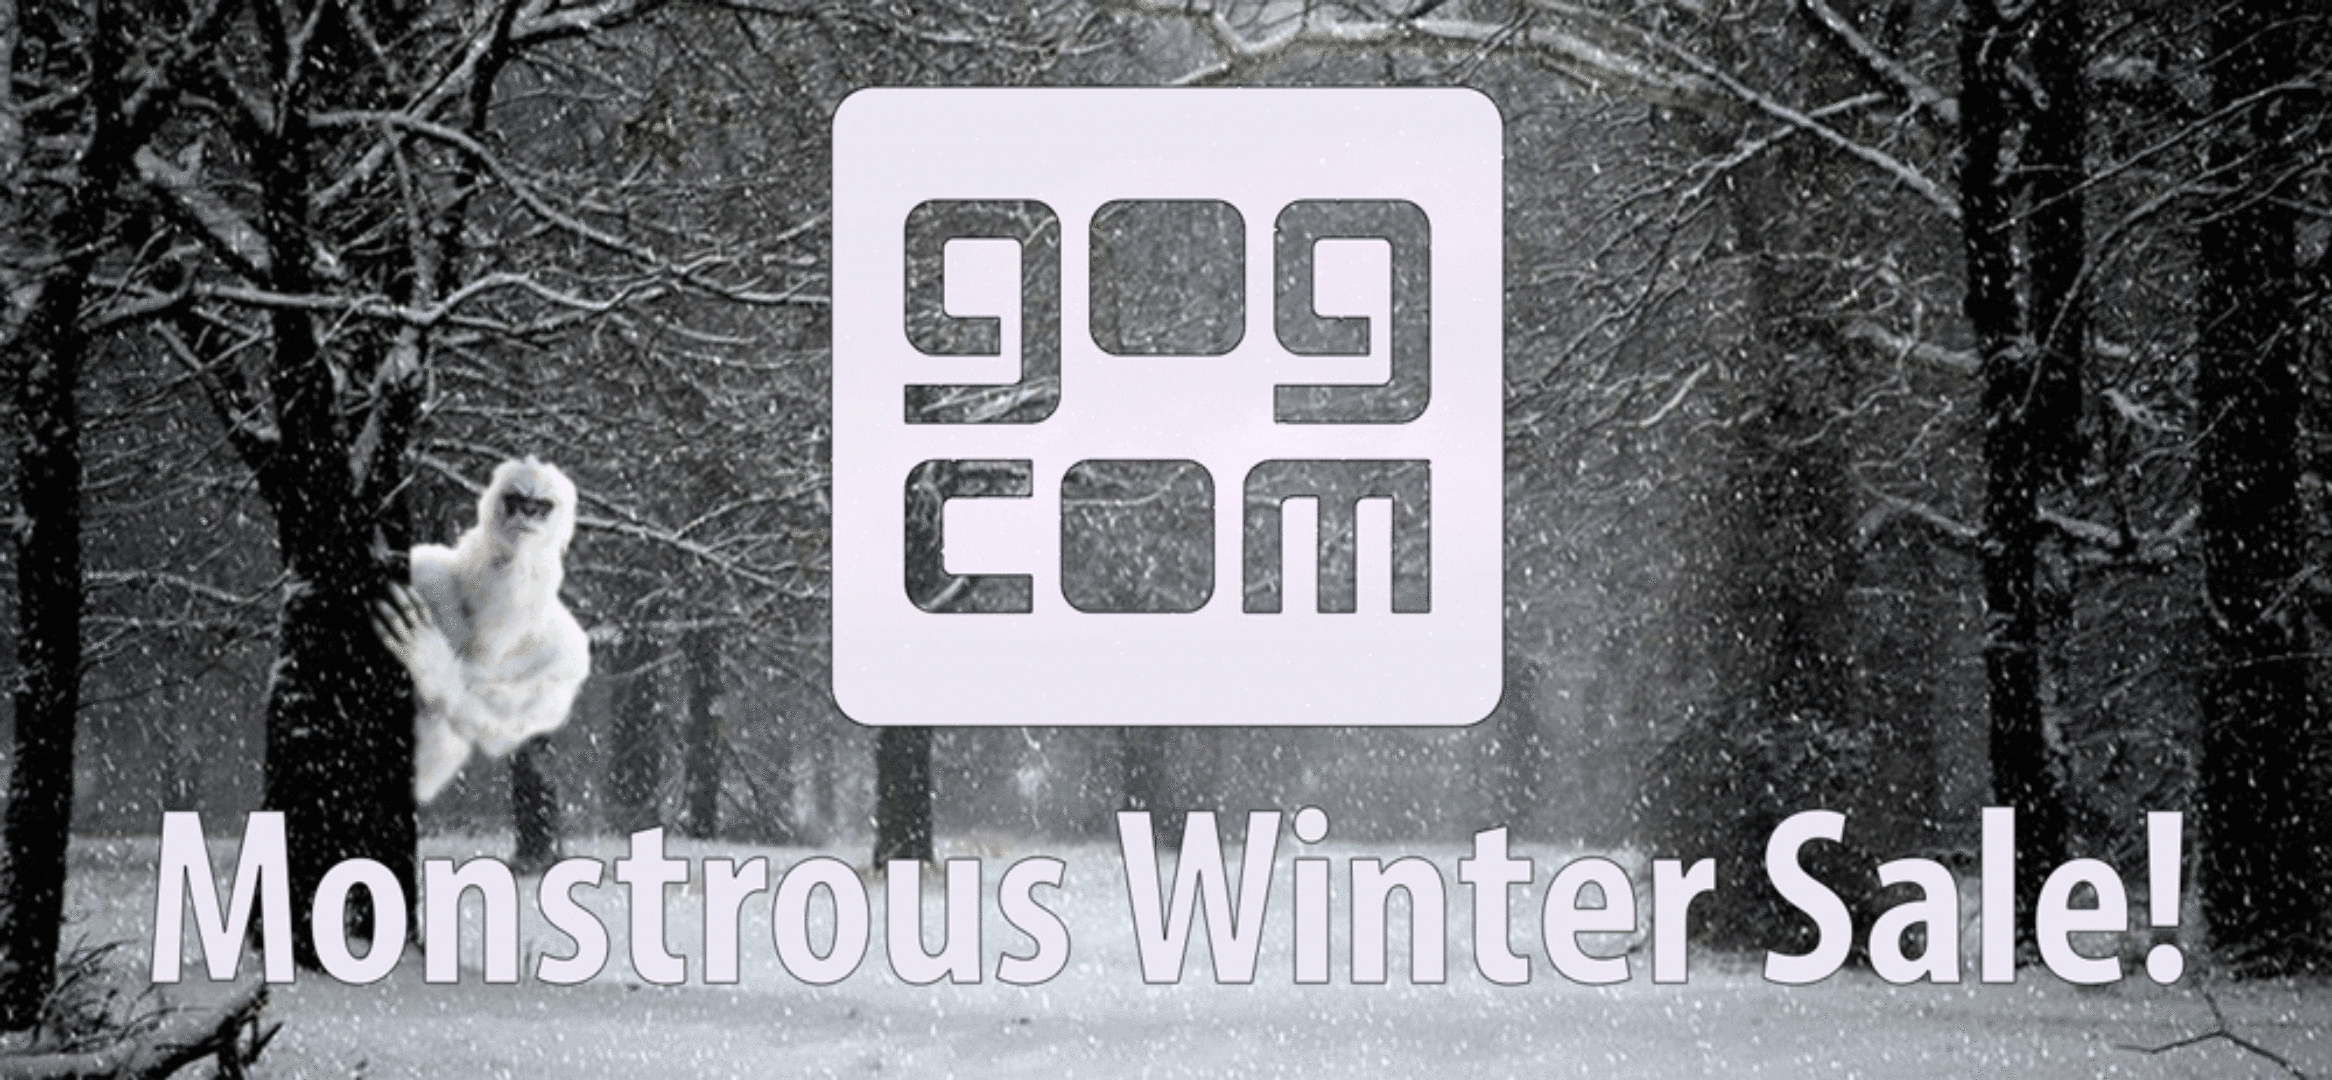 Gog Monstrous Winter Sale! Free Game Included